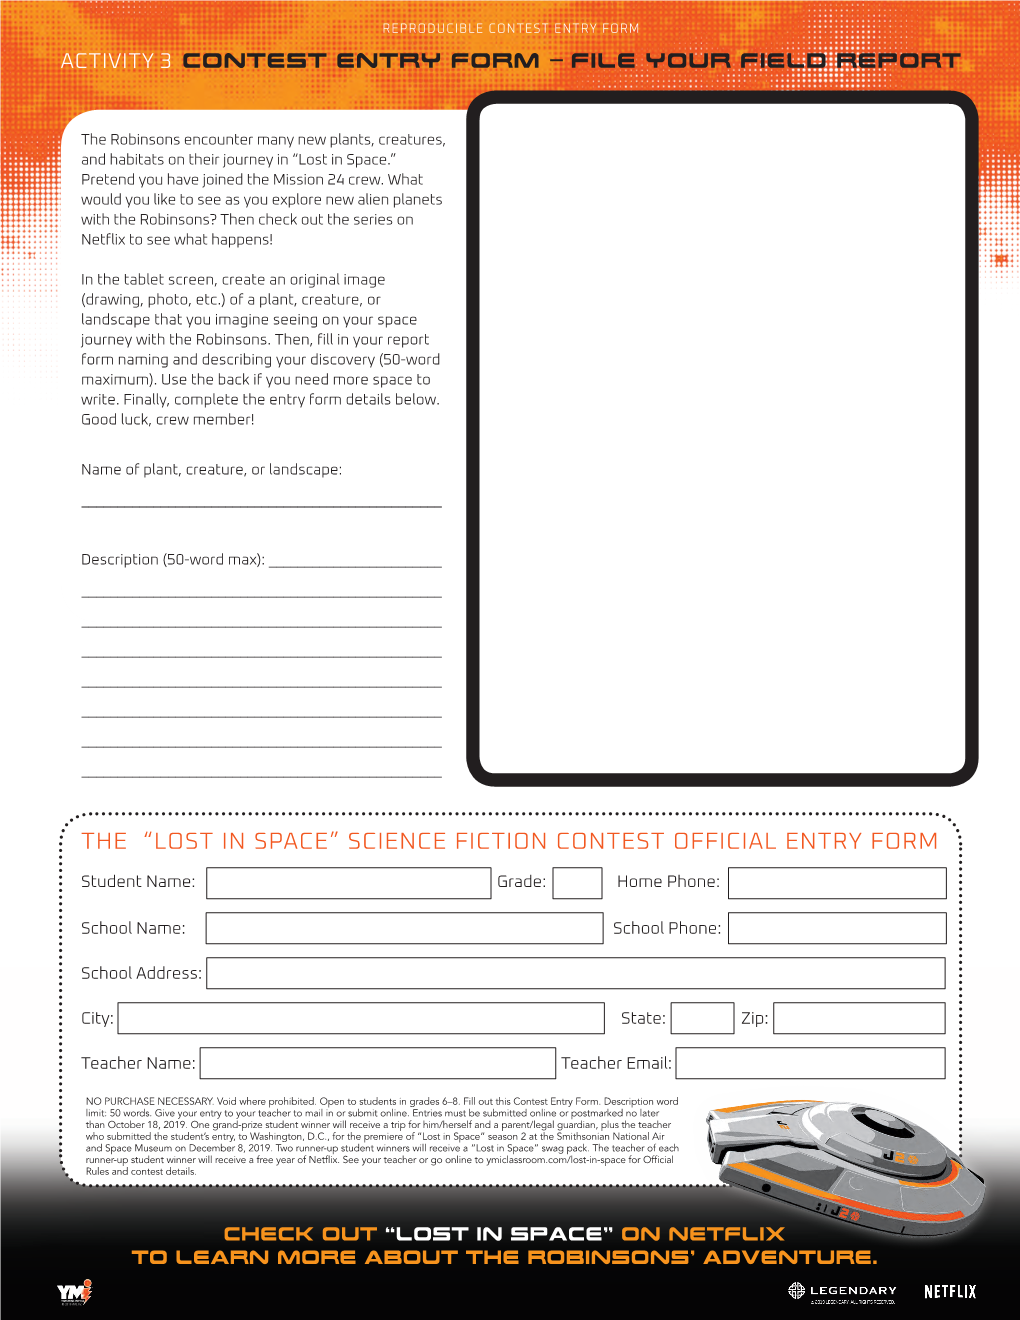 The “Lost in Space” Science Fiction Contest Official Entry Form